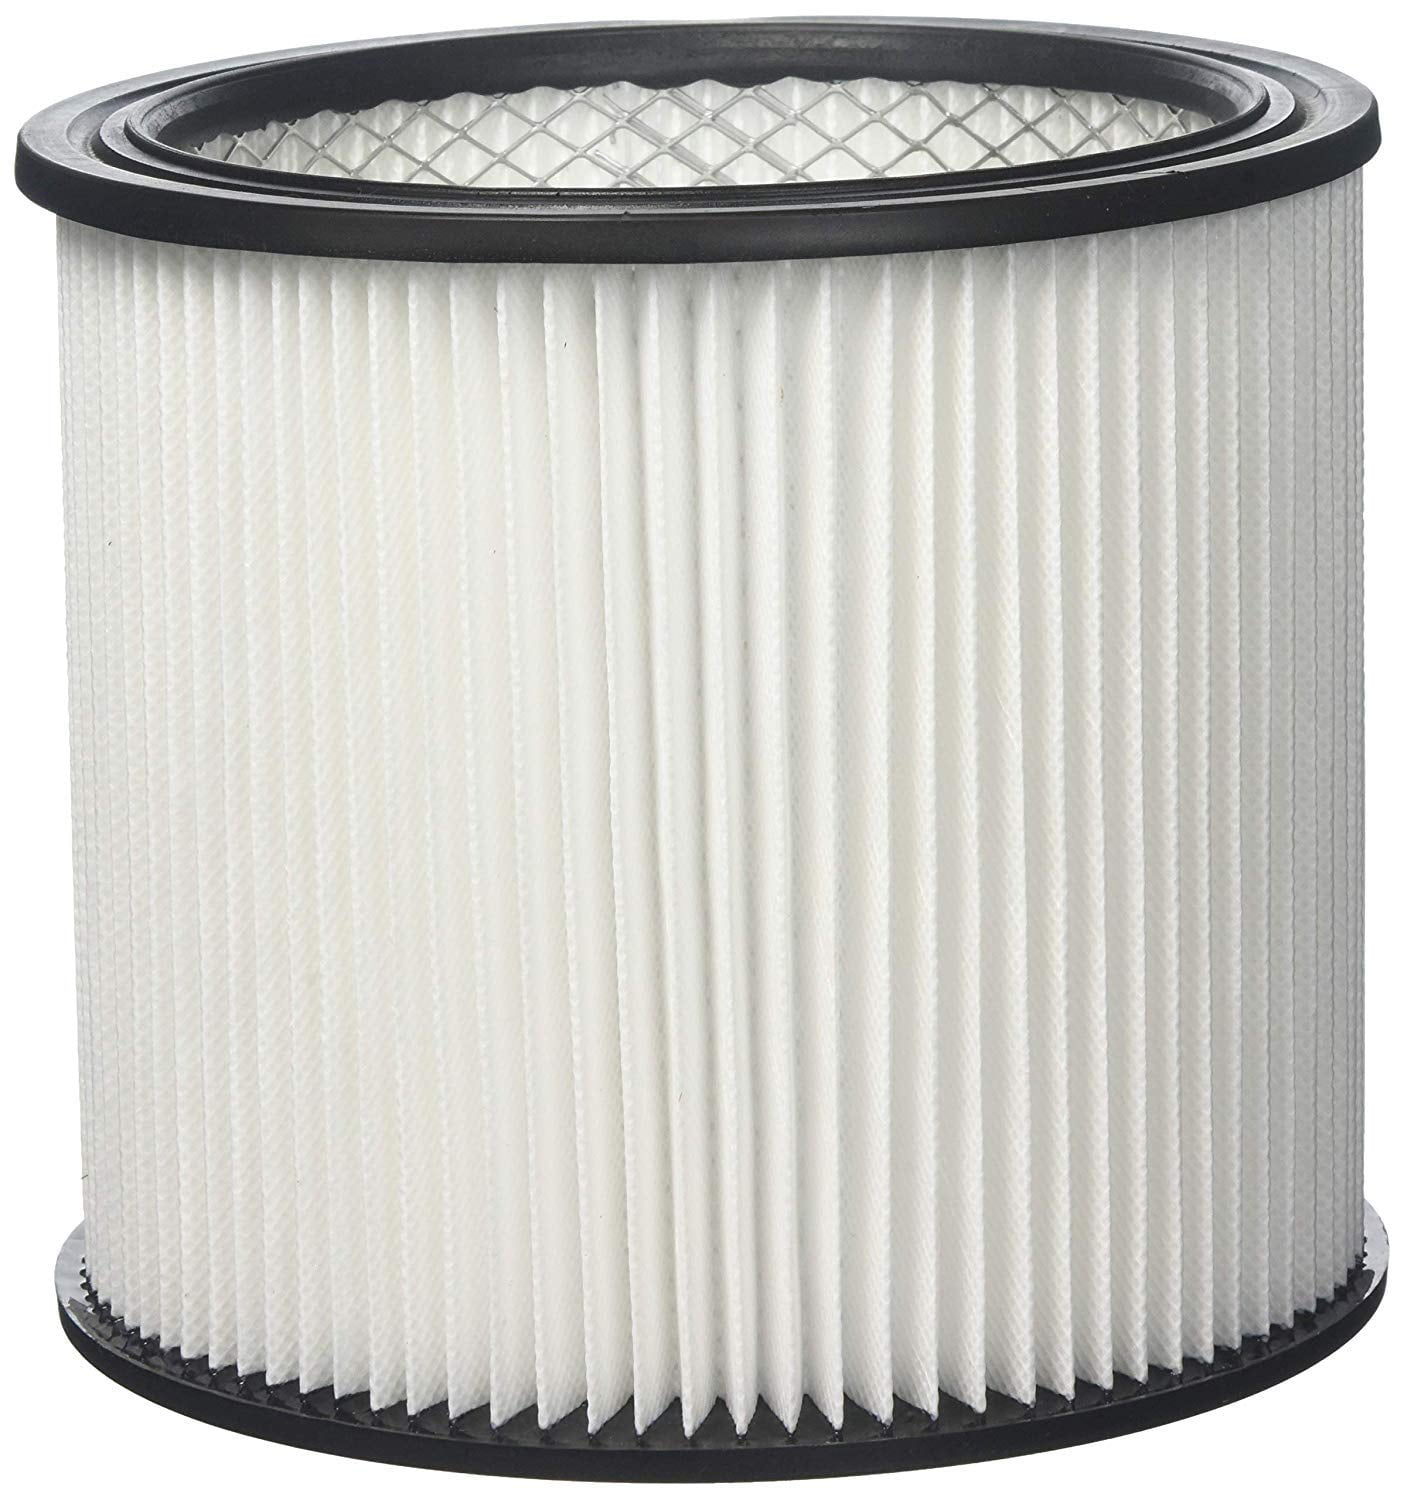 Filter Cartridge Fits Shop Vac Wet Dry Replace 90304 9030400 903-04-00 9034BB